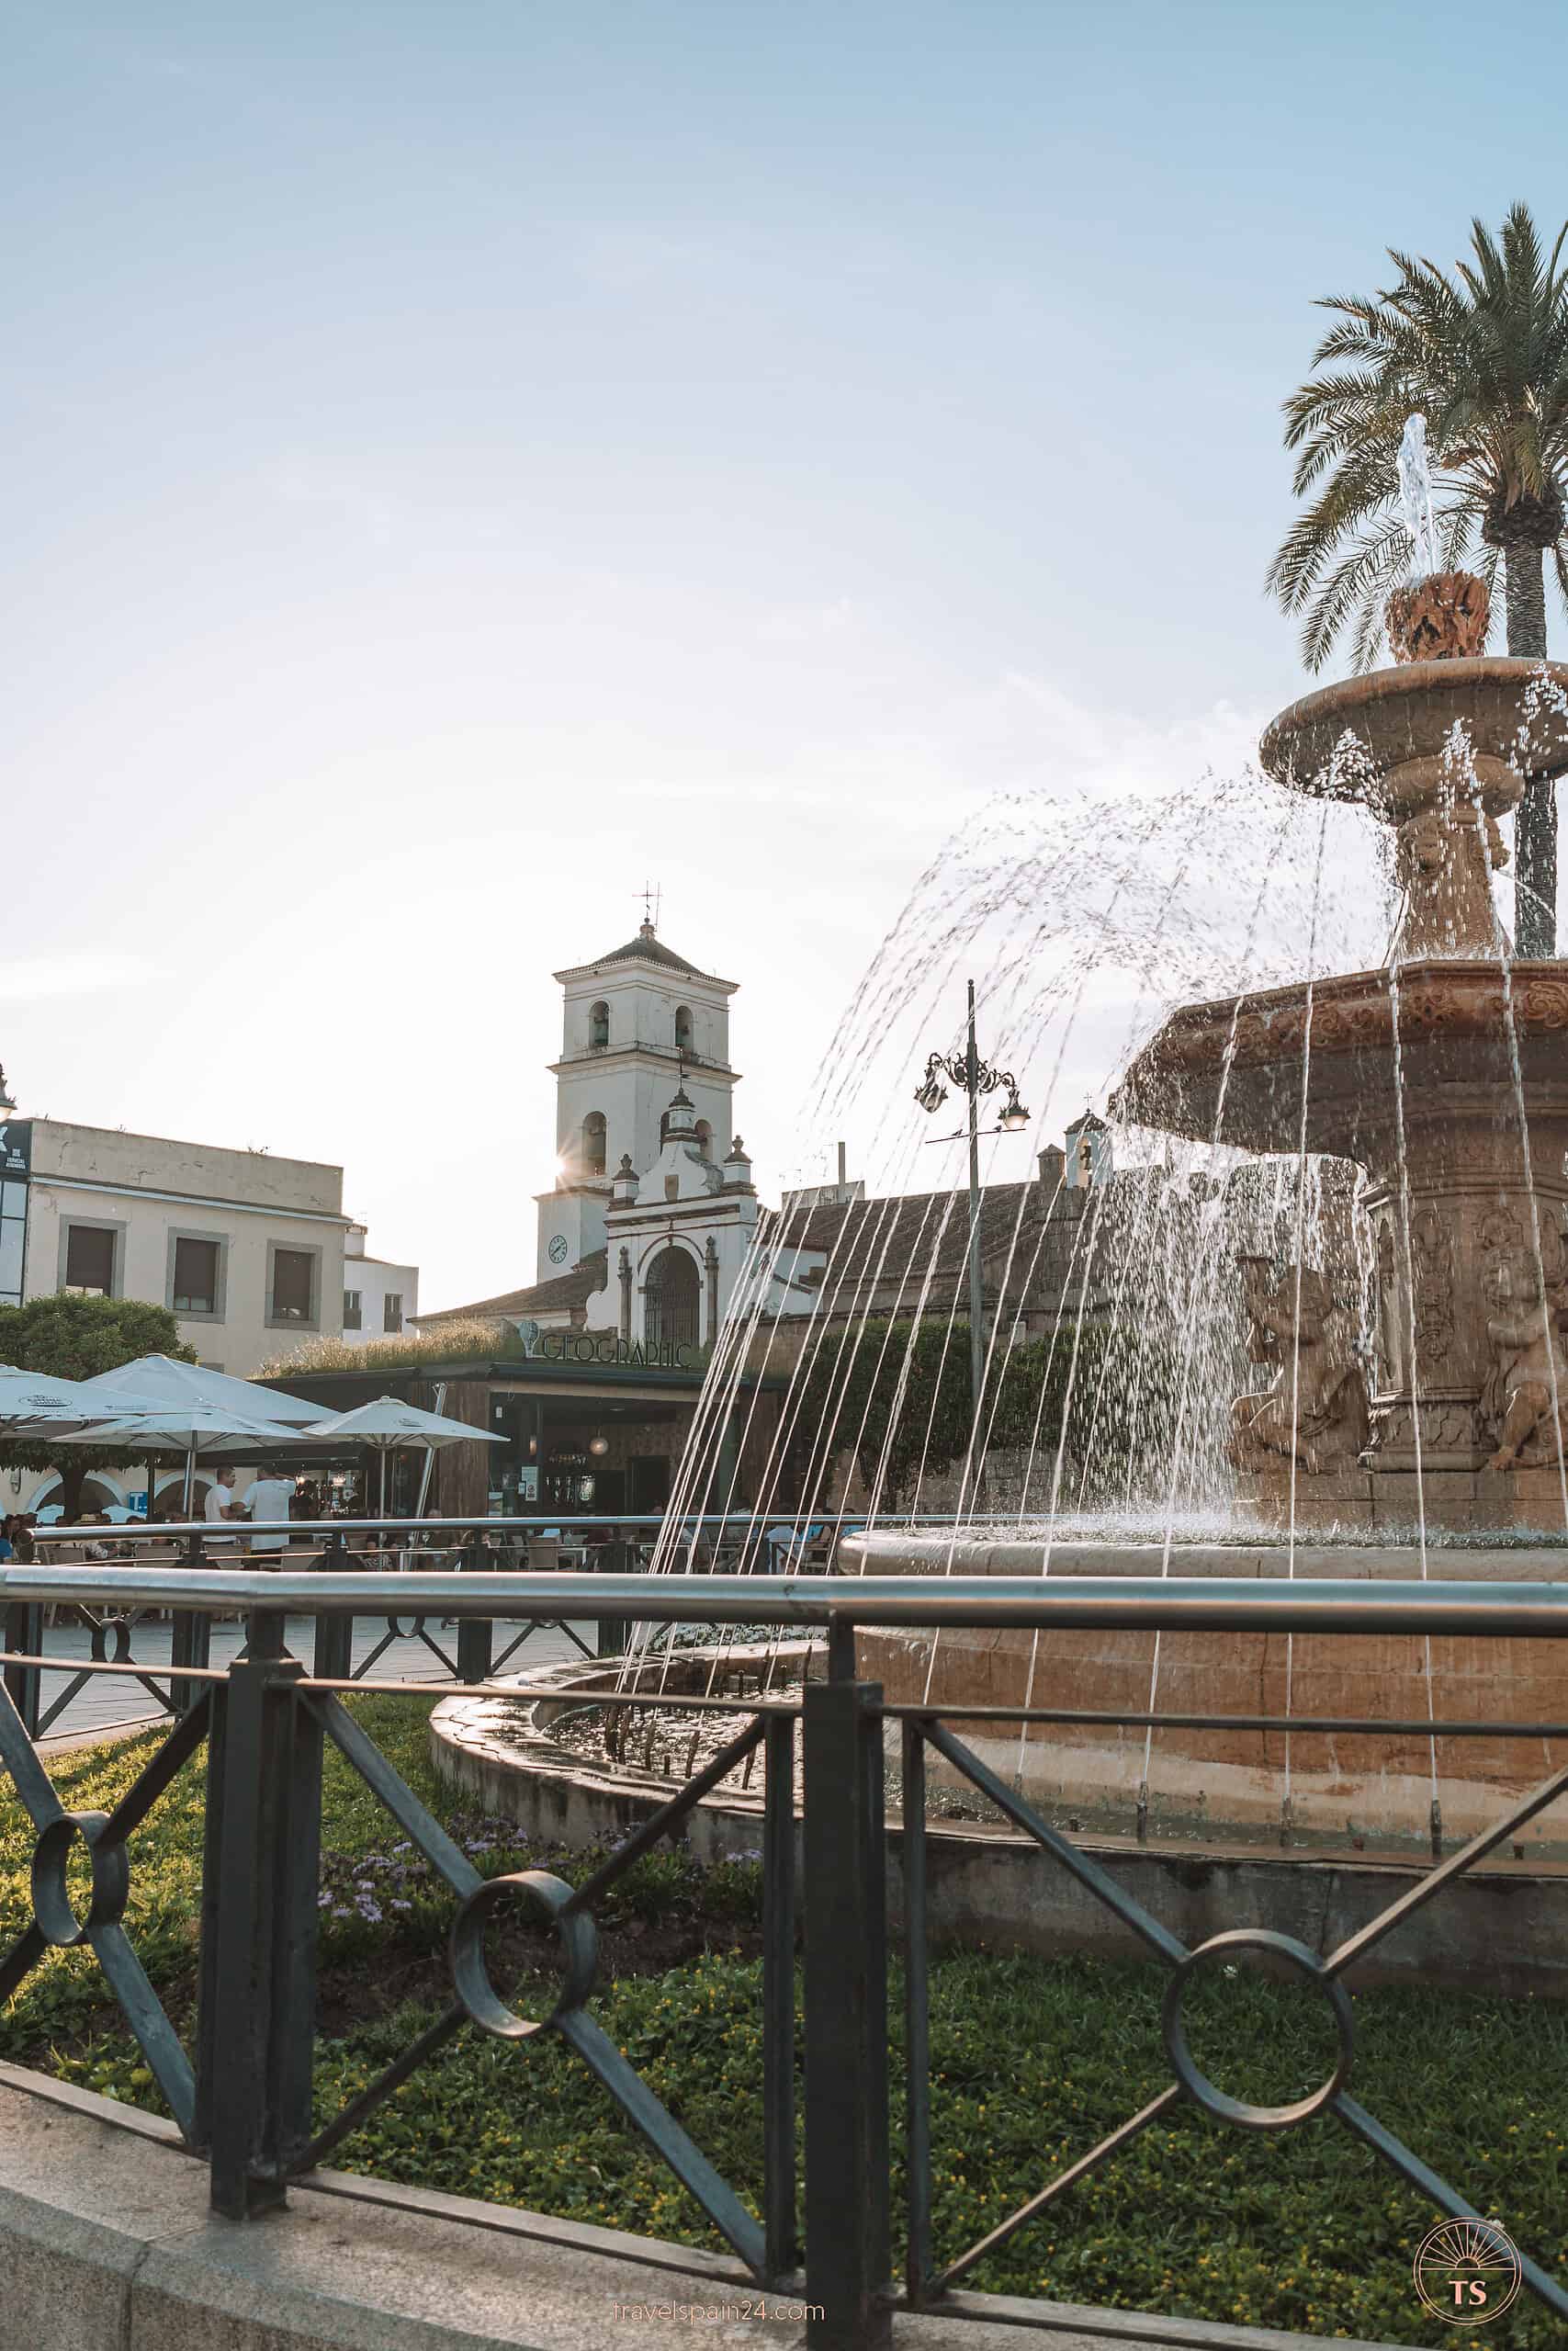 The fountain at Plaza España in Mérida, with sunlight casting rays behind the Co-cathedral of Saint Mary Major, highlighting a serene day in the city.